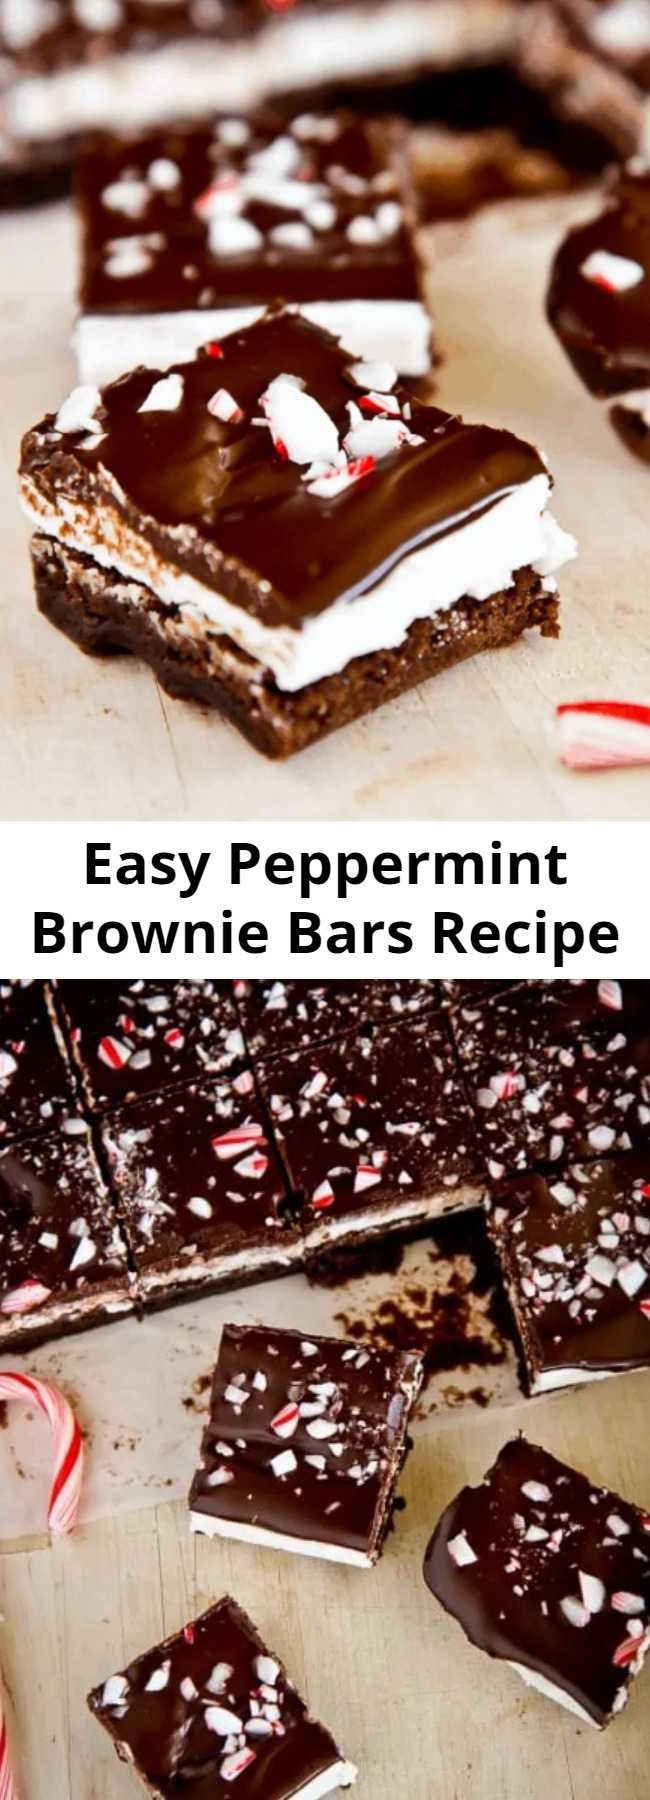 Easy Peppermint Brownie Bars Recipe - Rich and decadent with layers of flavor, these Chocolate Peppermint Brownie Bars are a fantastic holiday dessert. If you love the combo of rich chocolate and refreshing mint, then these brownies are for you! On a holiday cookie tray with other treats these Peppermint Brownie Bars will pretty much steal the show. They are all kinds of minty amazingness.